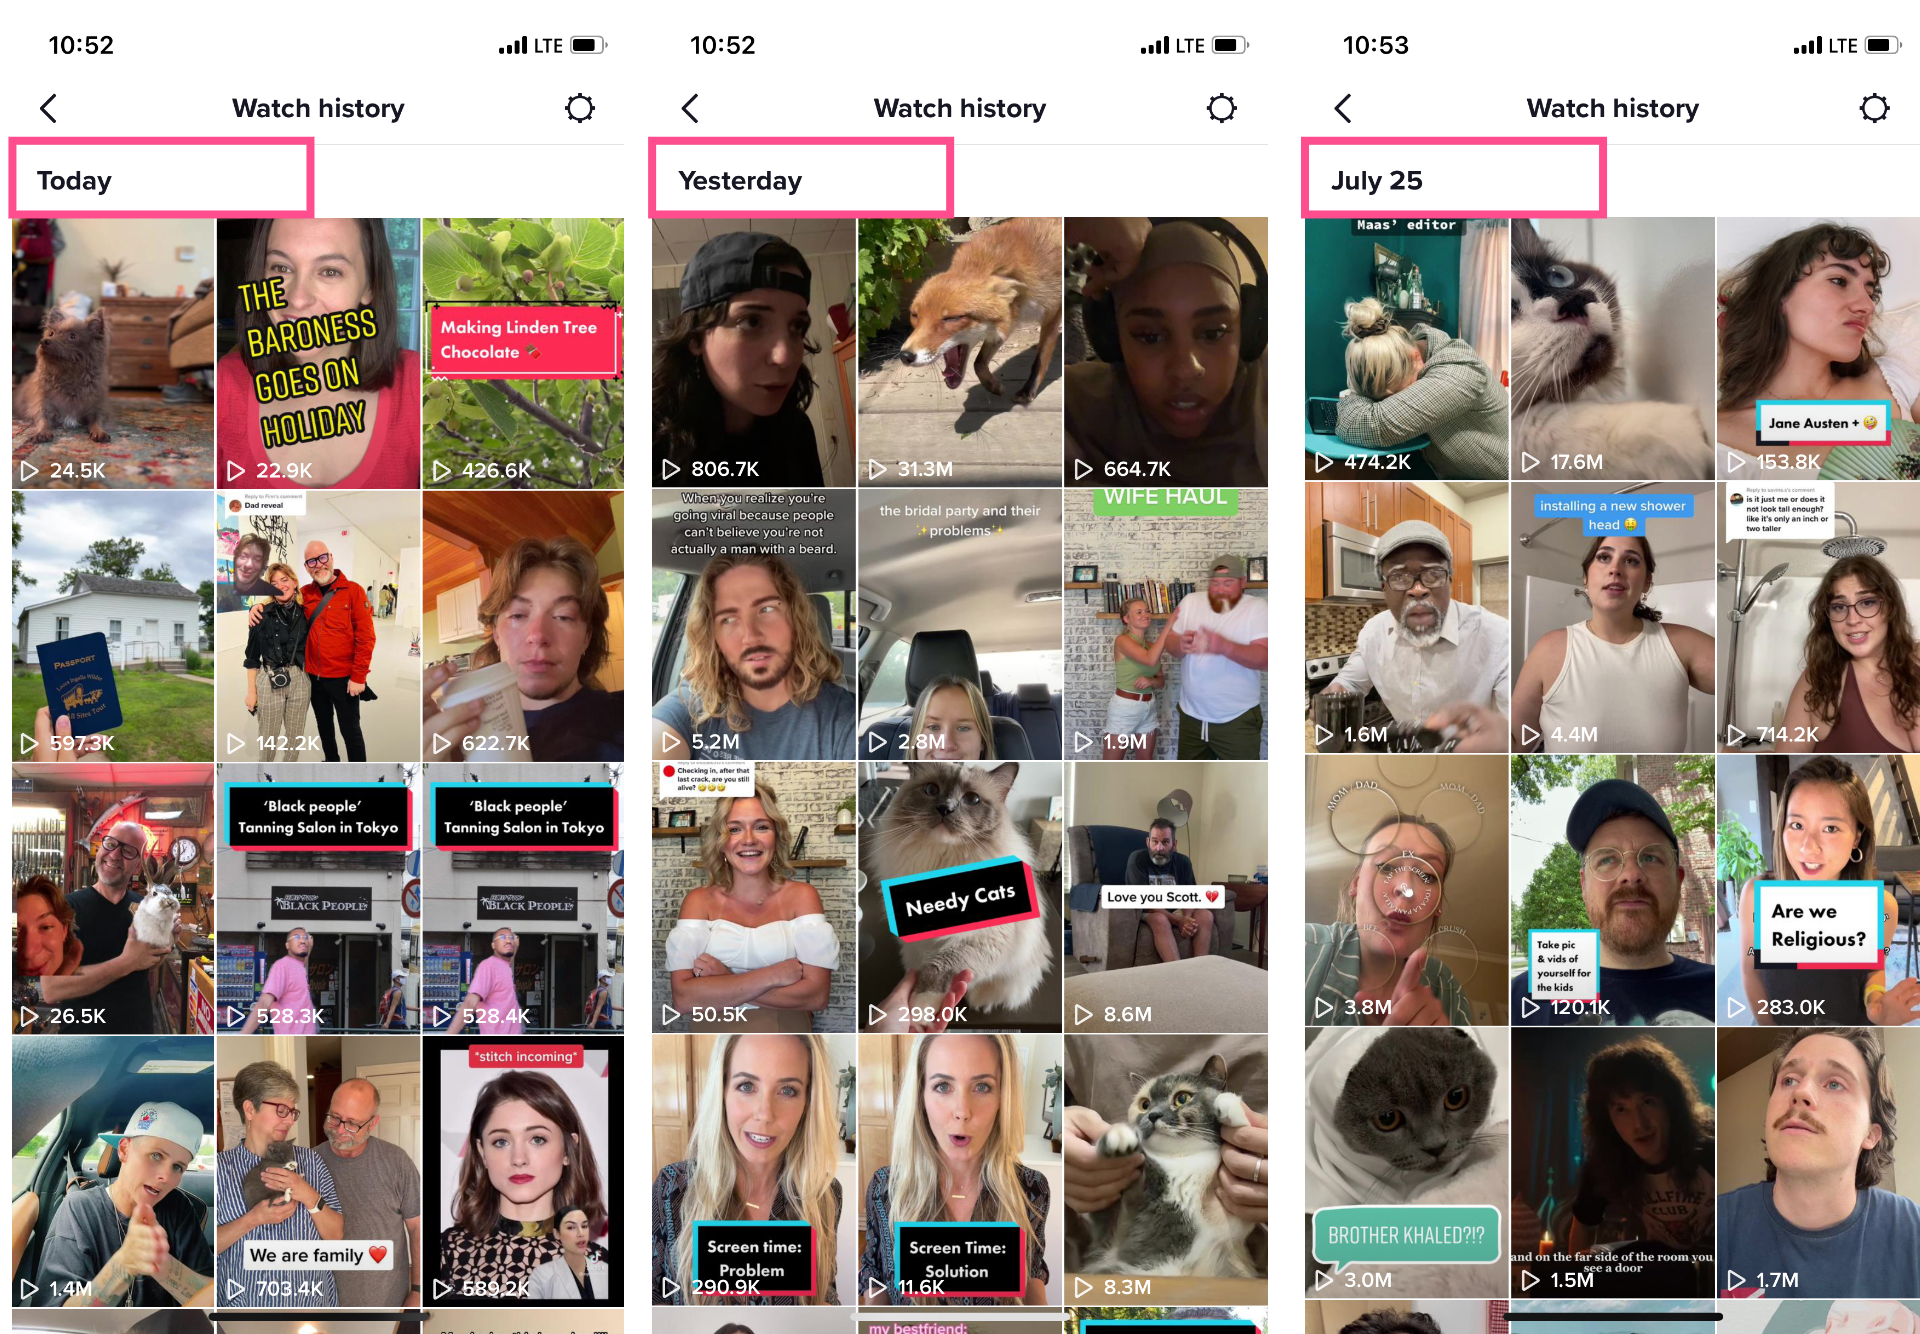 How to See Your TikTok Watch History and Find Watched Videos